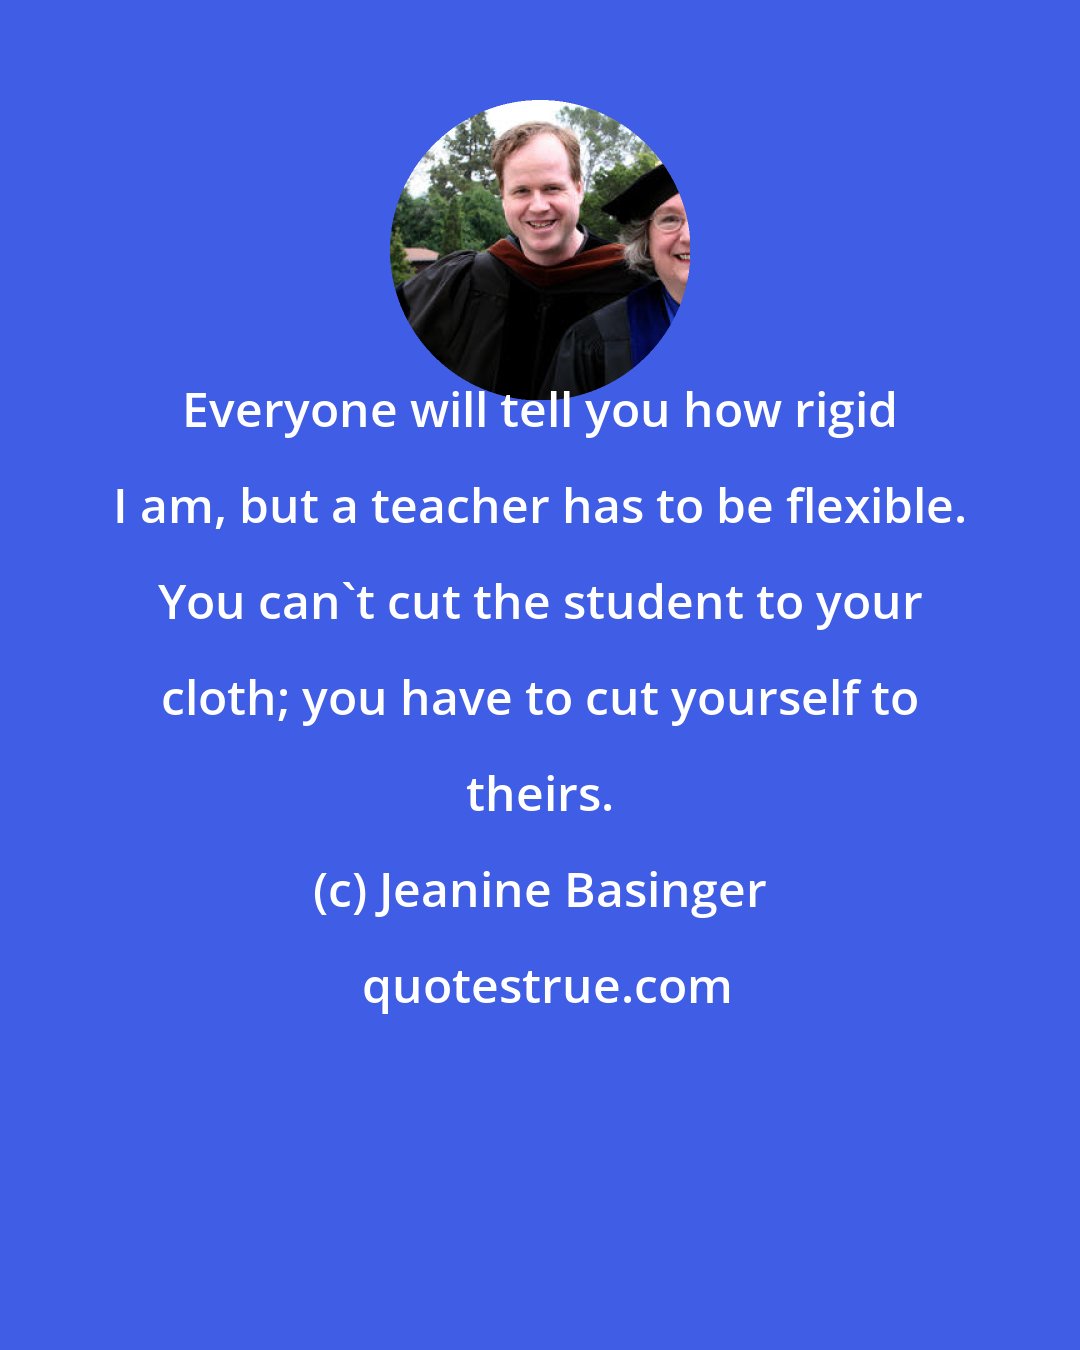 Jeanine Basinger: Everyone will tell you how rigid I am, but a teacher has to be flexible. You can't cut the student to your cloth; you have to cut yourself to theirs.